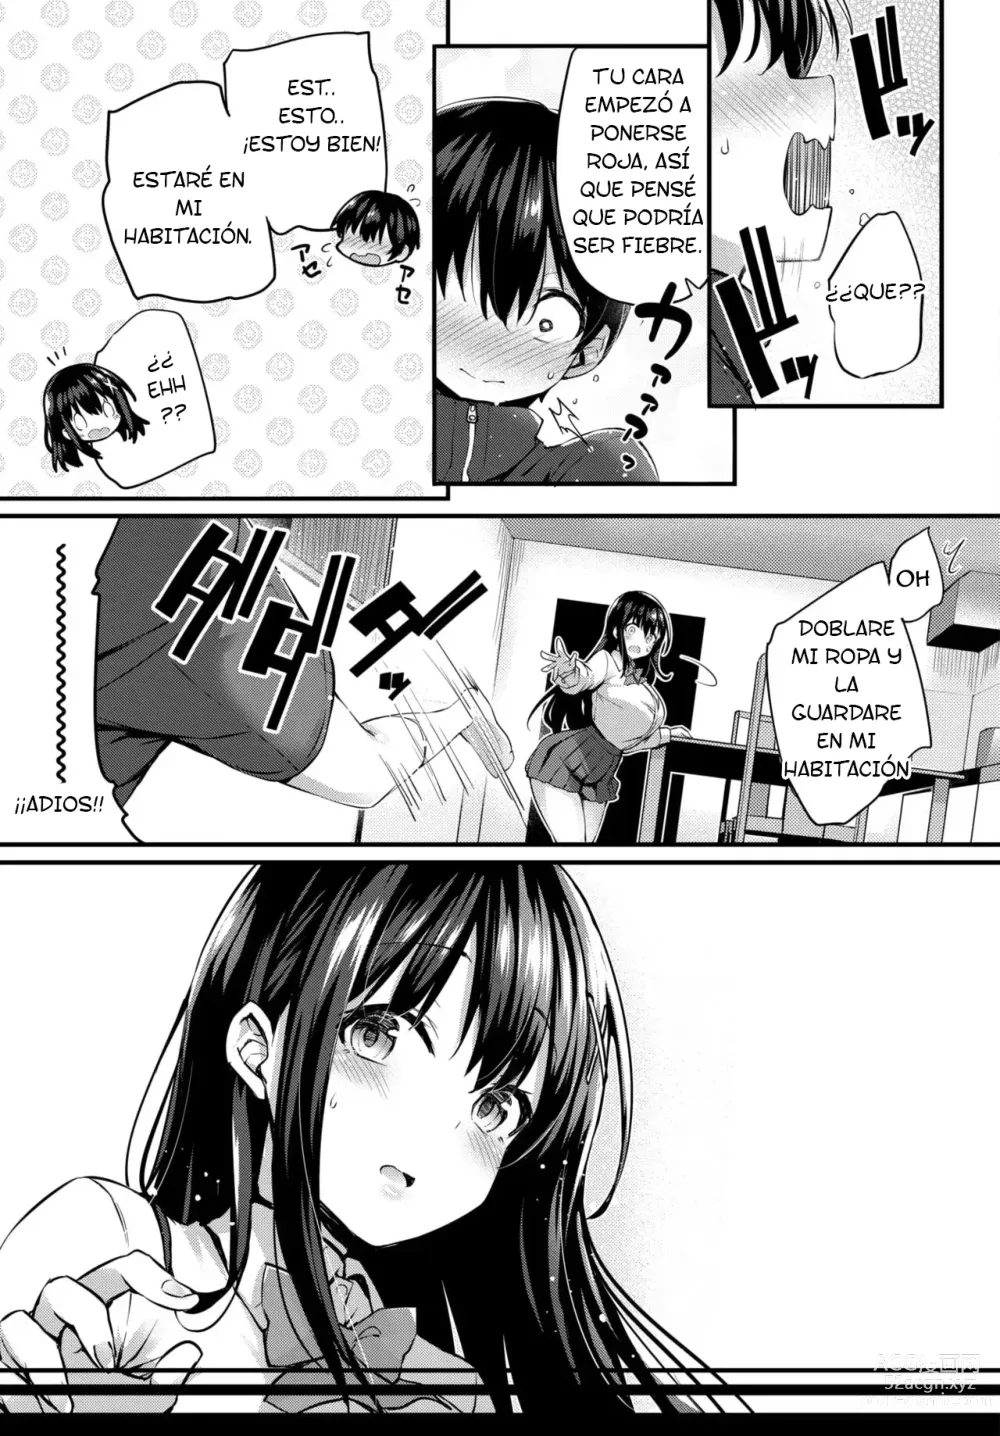 Page 5 of manga Boku no Onee-chan - My beloved was defiled and taken from me...